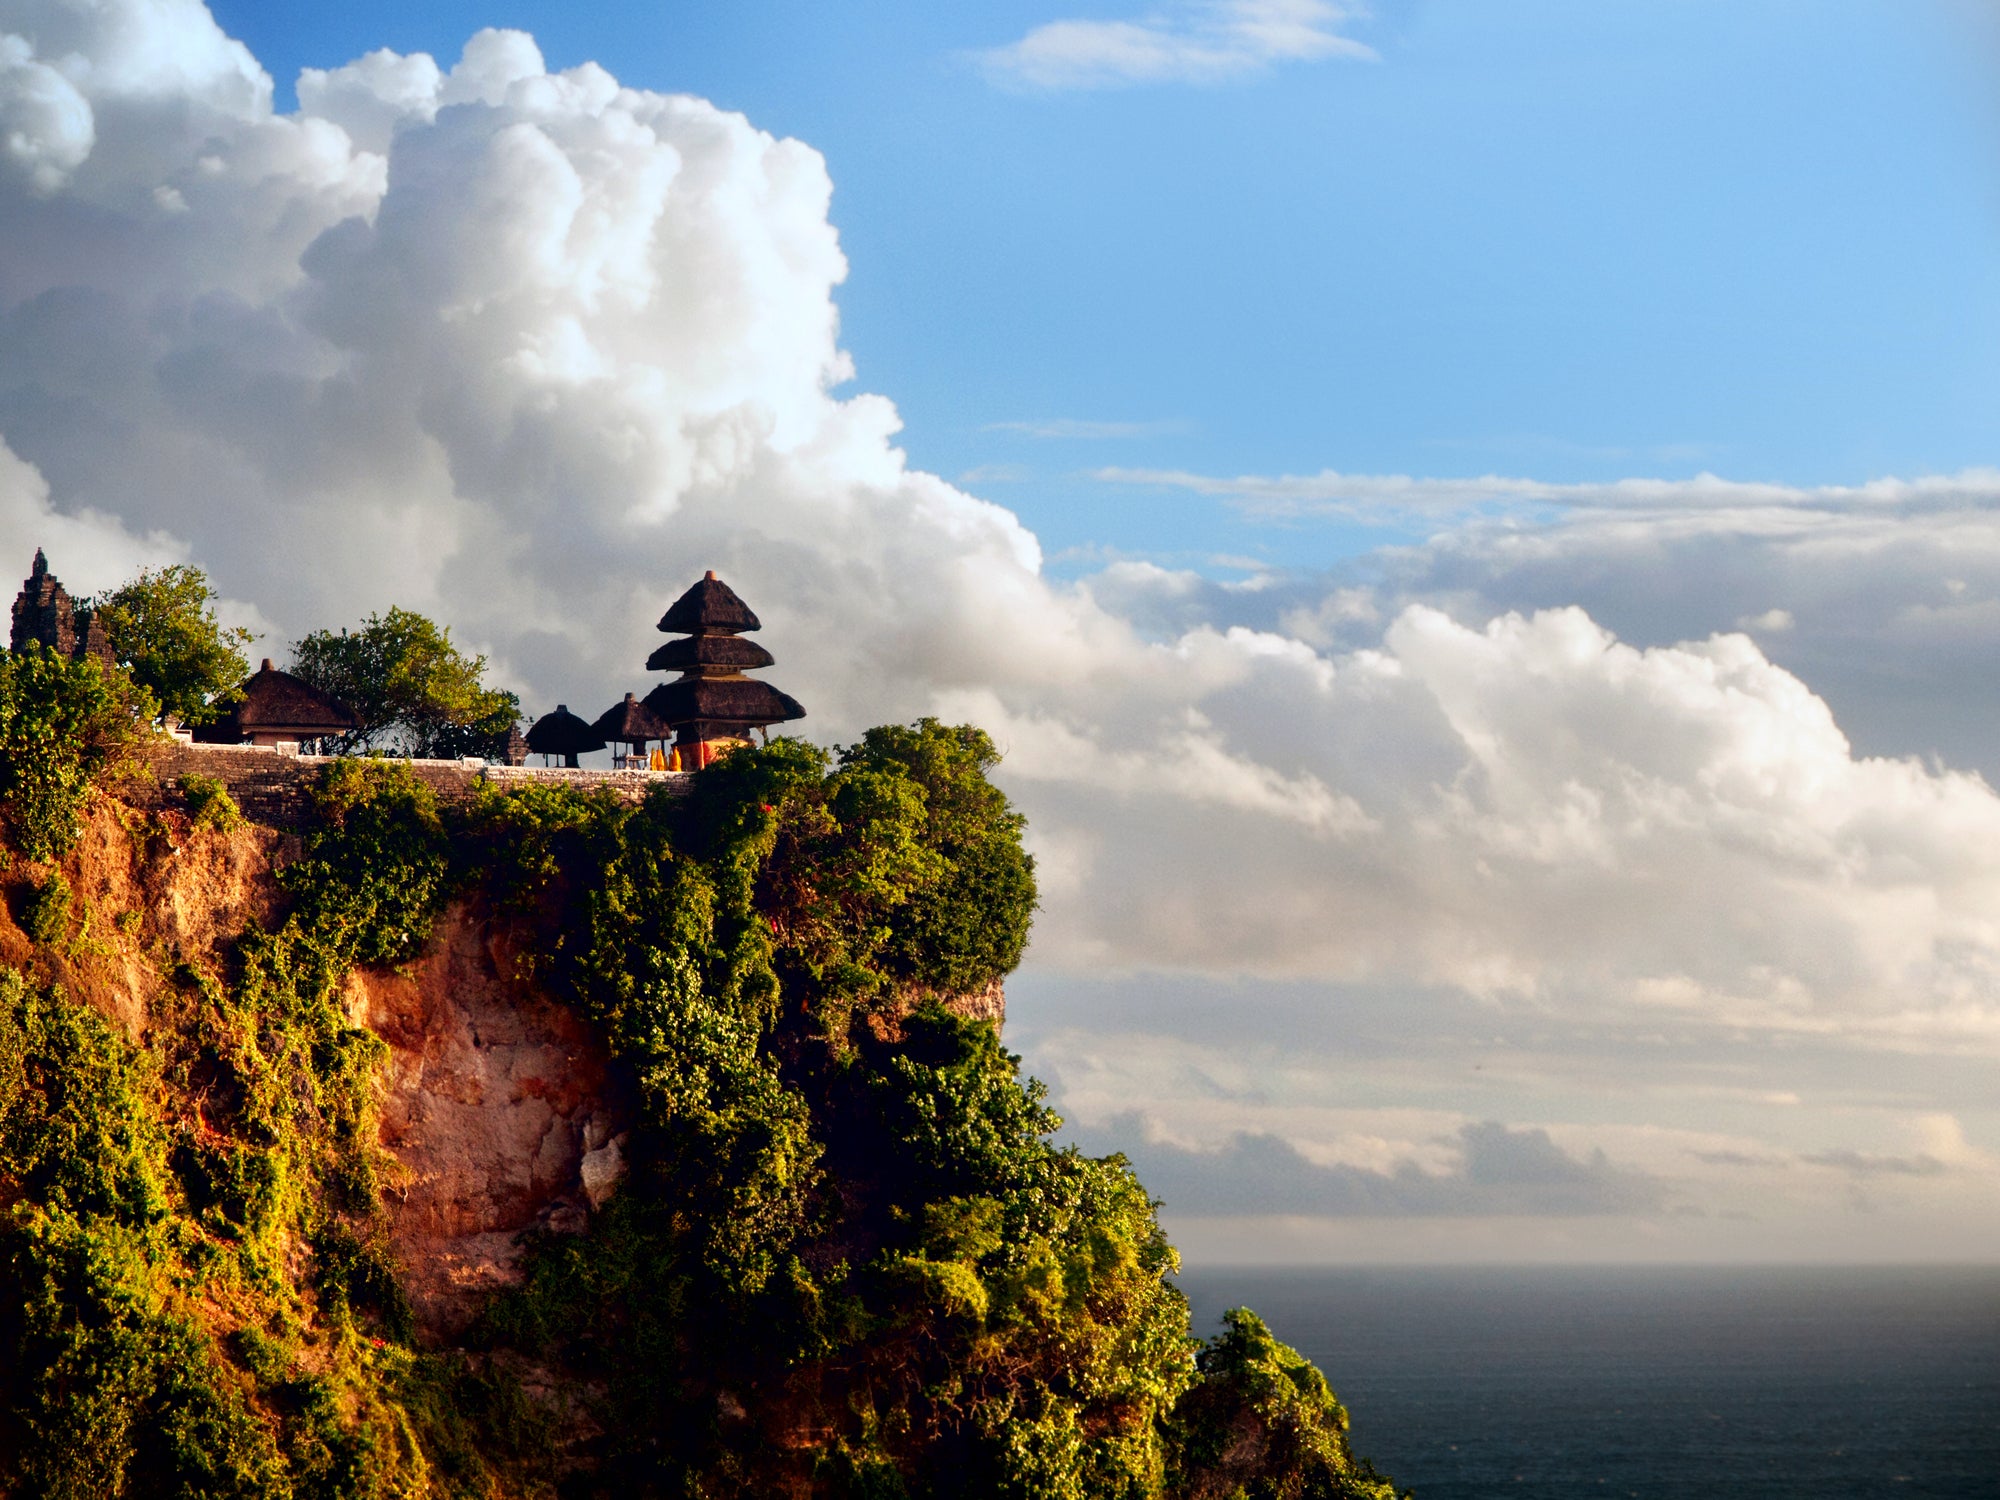 Uluwatu’s cliff-edge temple is considered one of the holiest places in Bali